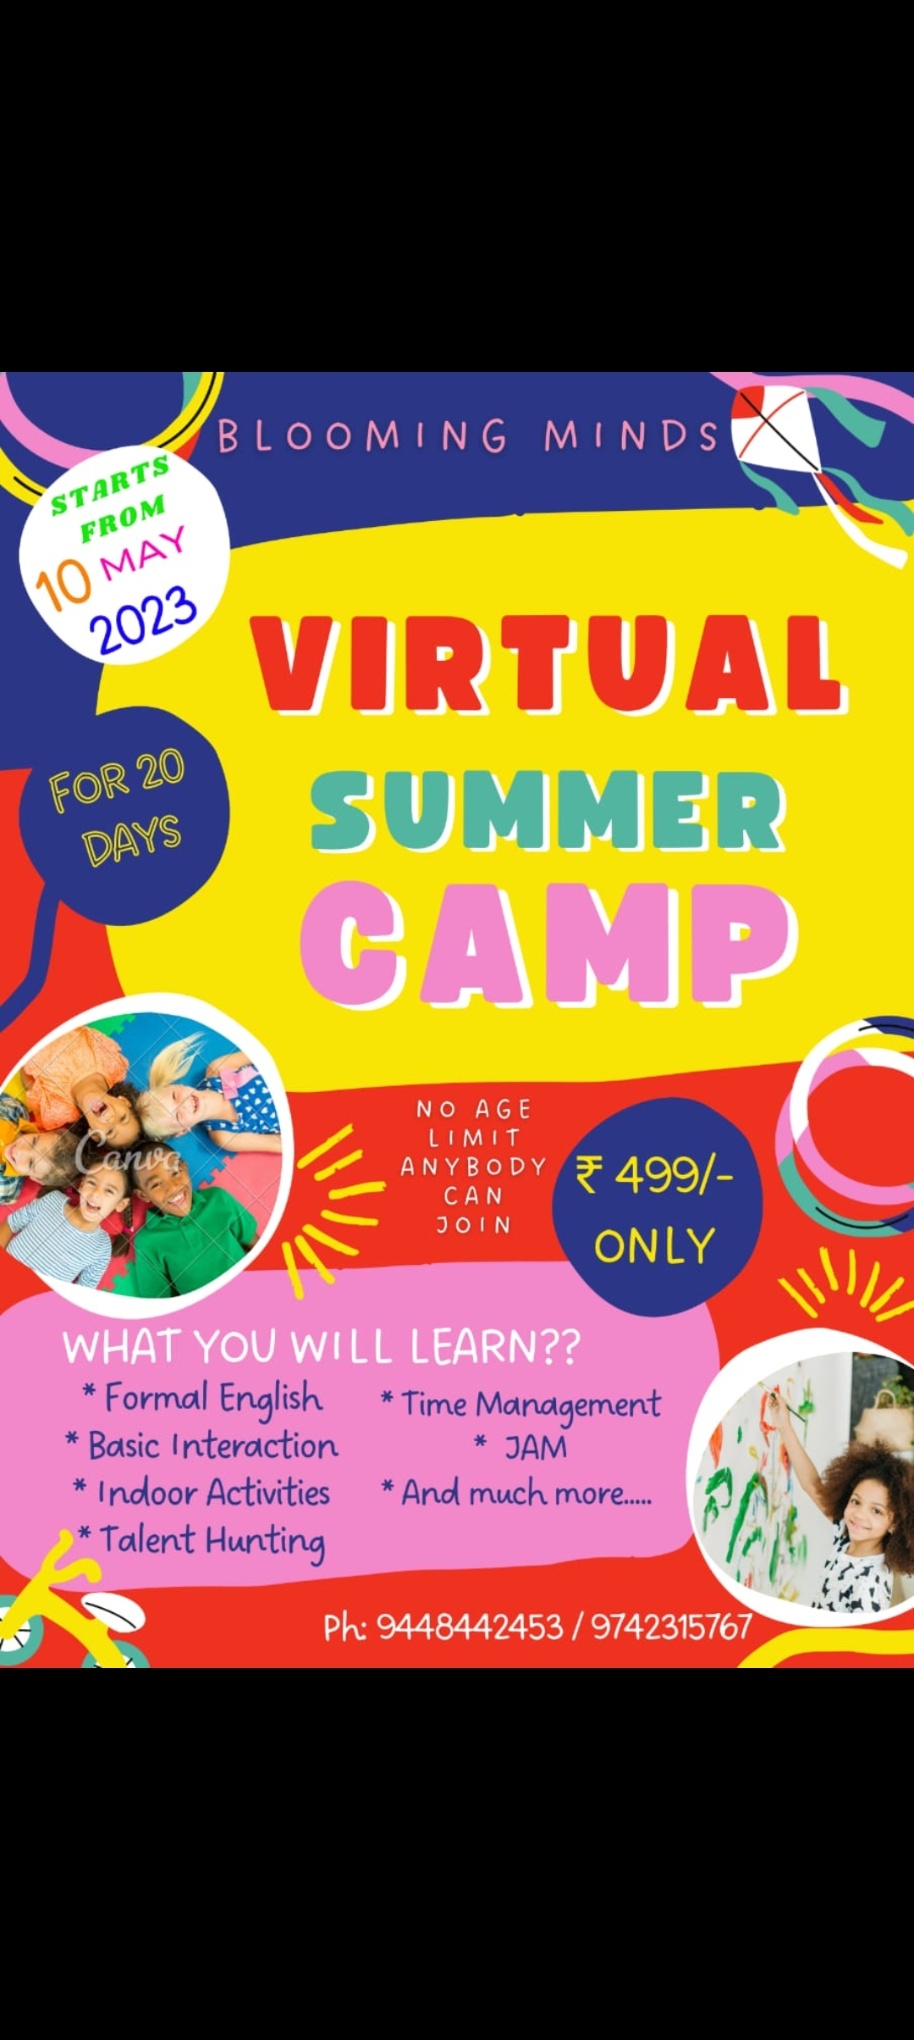 Hurry!! Limited seats only. Just for rs. 499 Enroll right now.